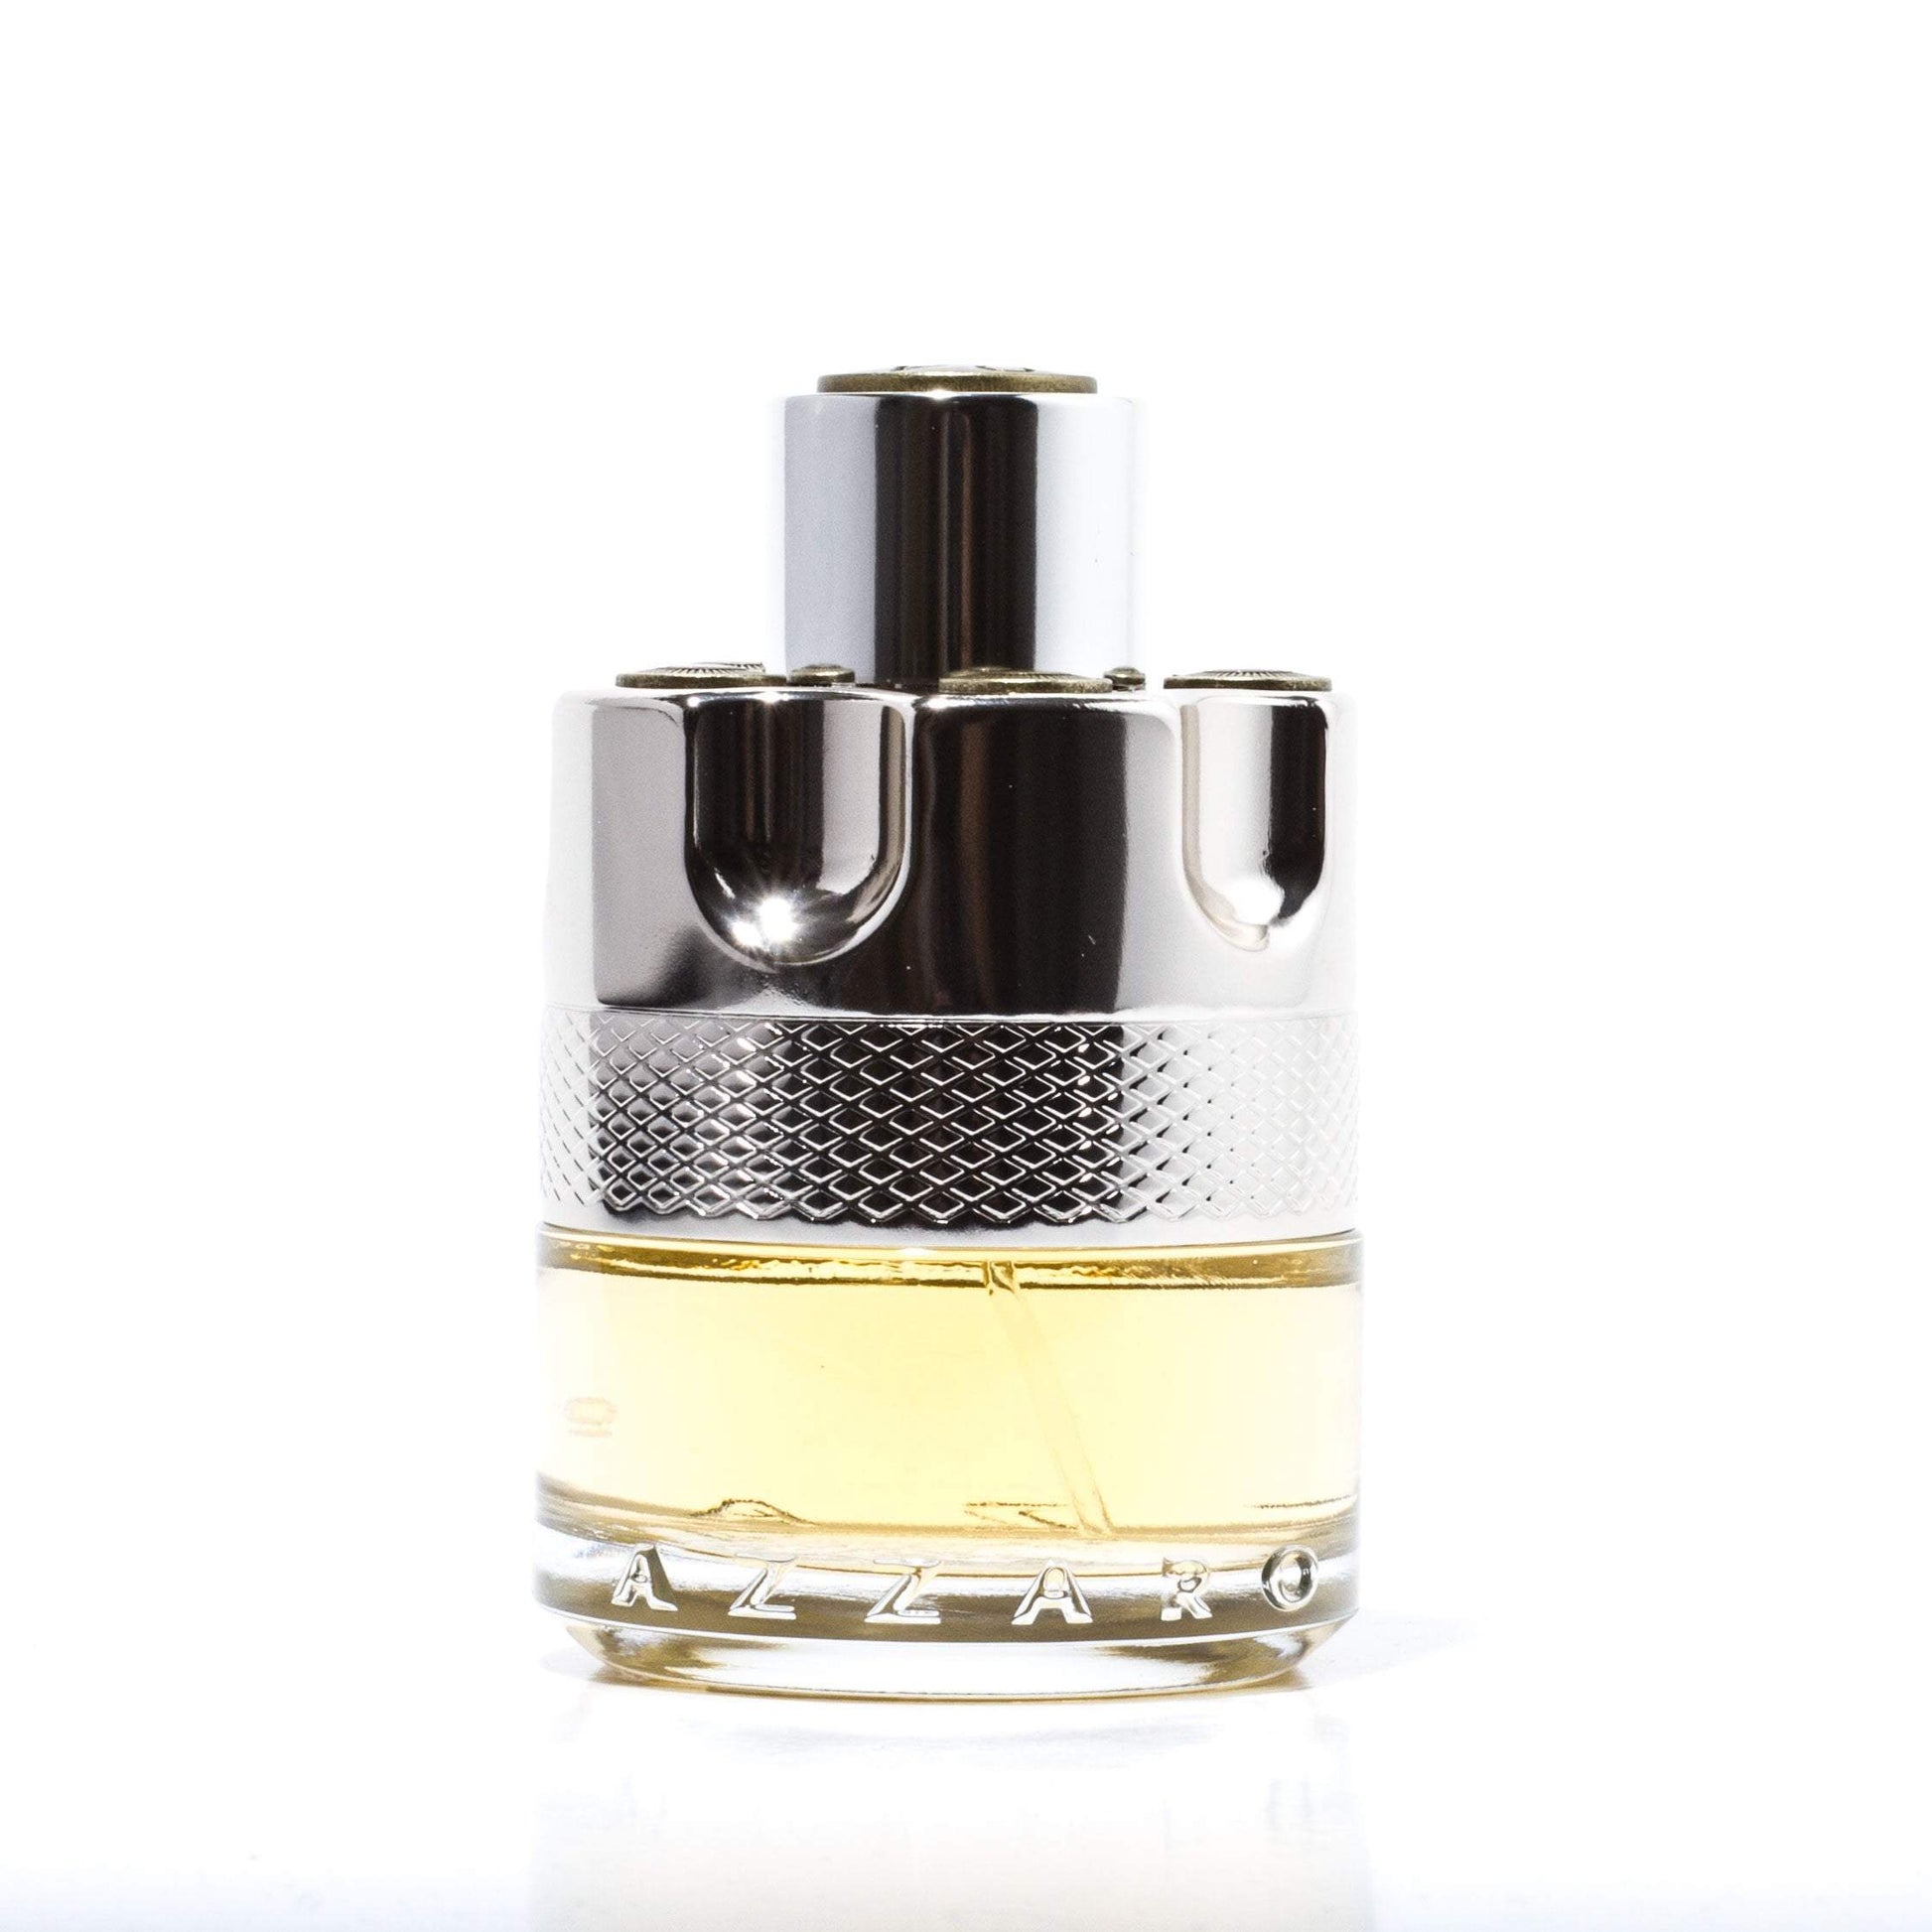 Wanted Eau de Toilette Spray for Men by Azzaro, Product image 2